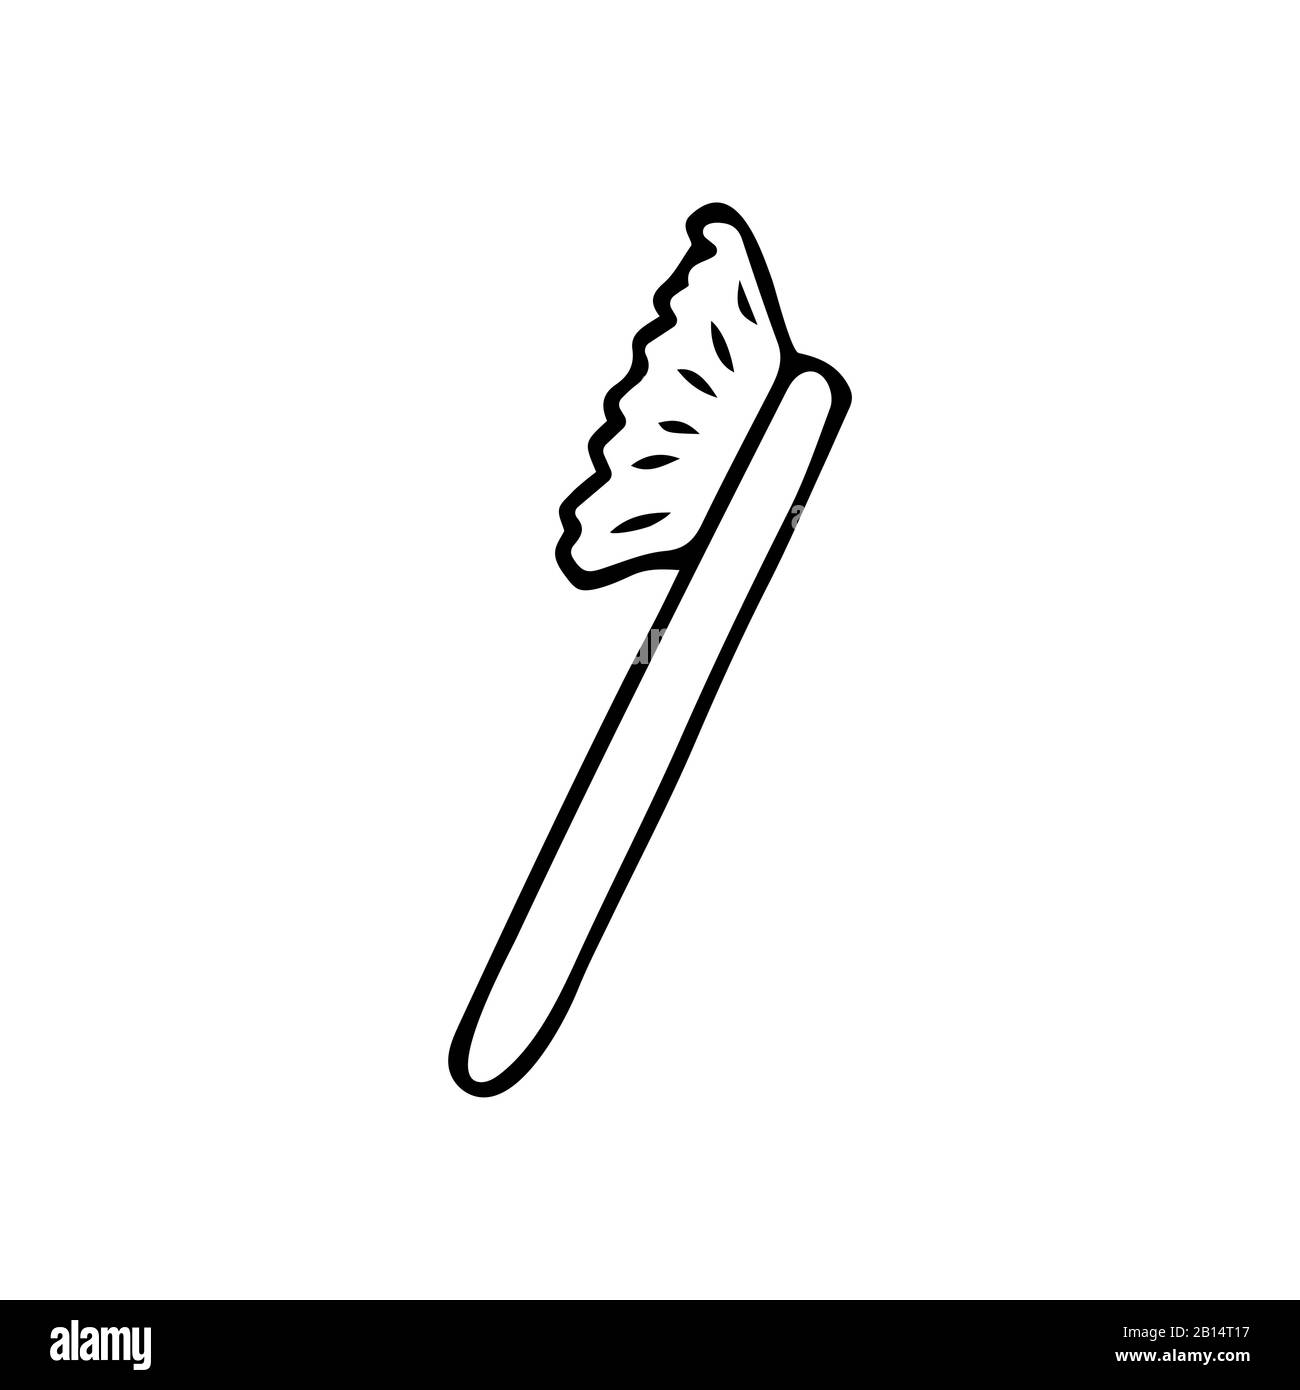 Toothbrush. Cleaning brush. Accessories made of bamboo. Eco-friendly. Black and white illustration on a white background in doodle style Stock Vector